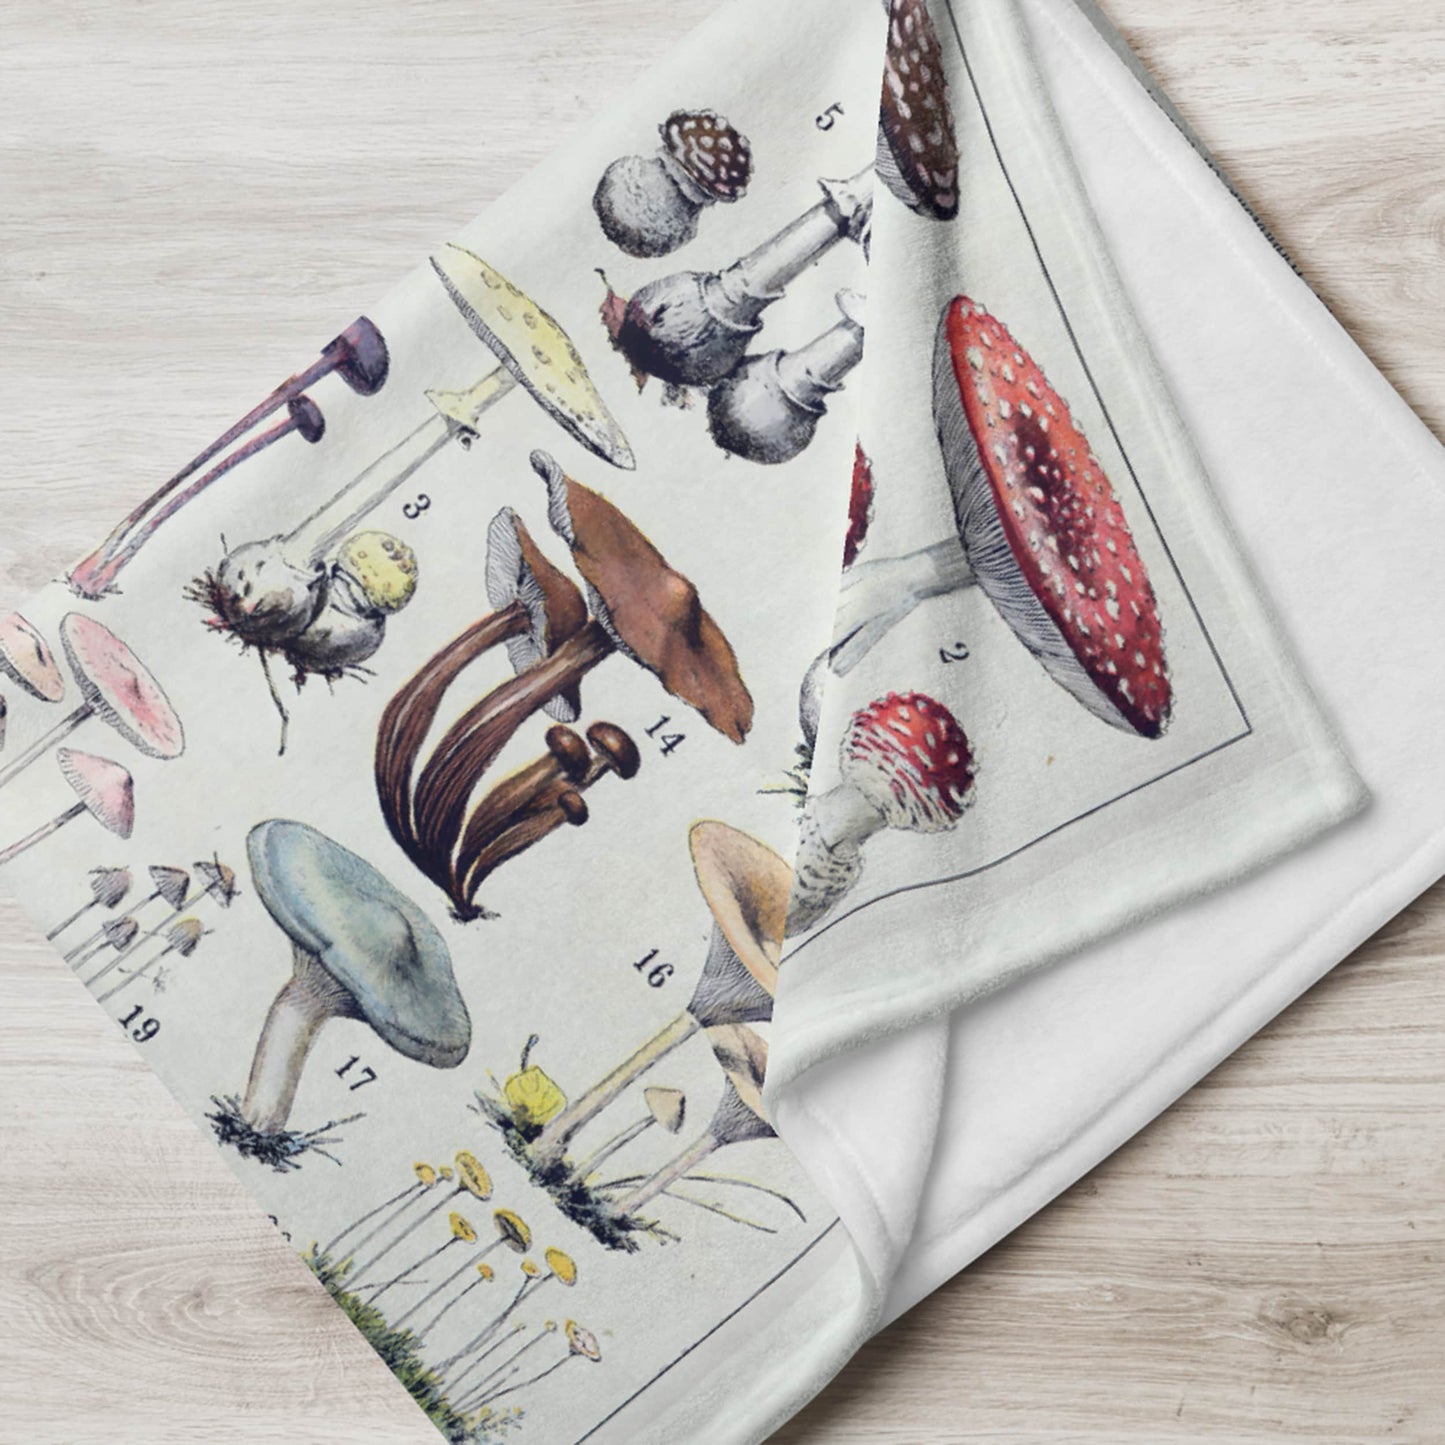 Elegant fleece blanket with a detailed illustration of various mushroom species draped on a wooden floor, offering both a cozy home accessory and an educational glimpse into mycology